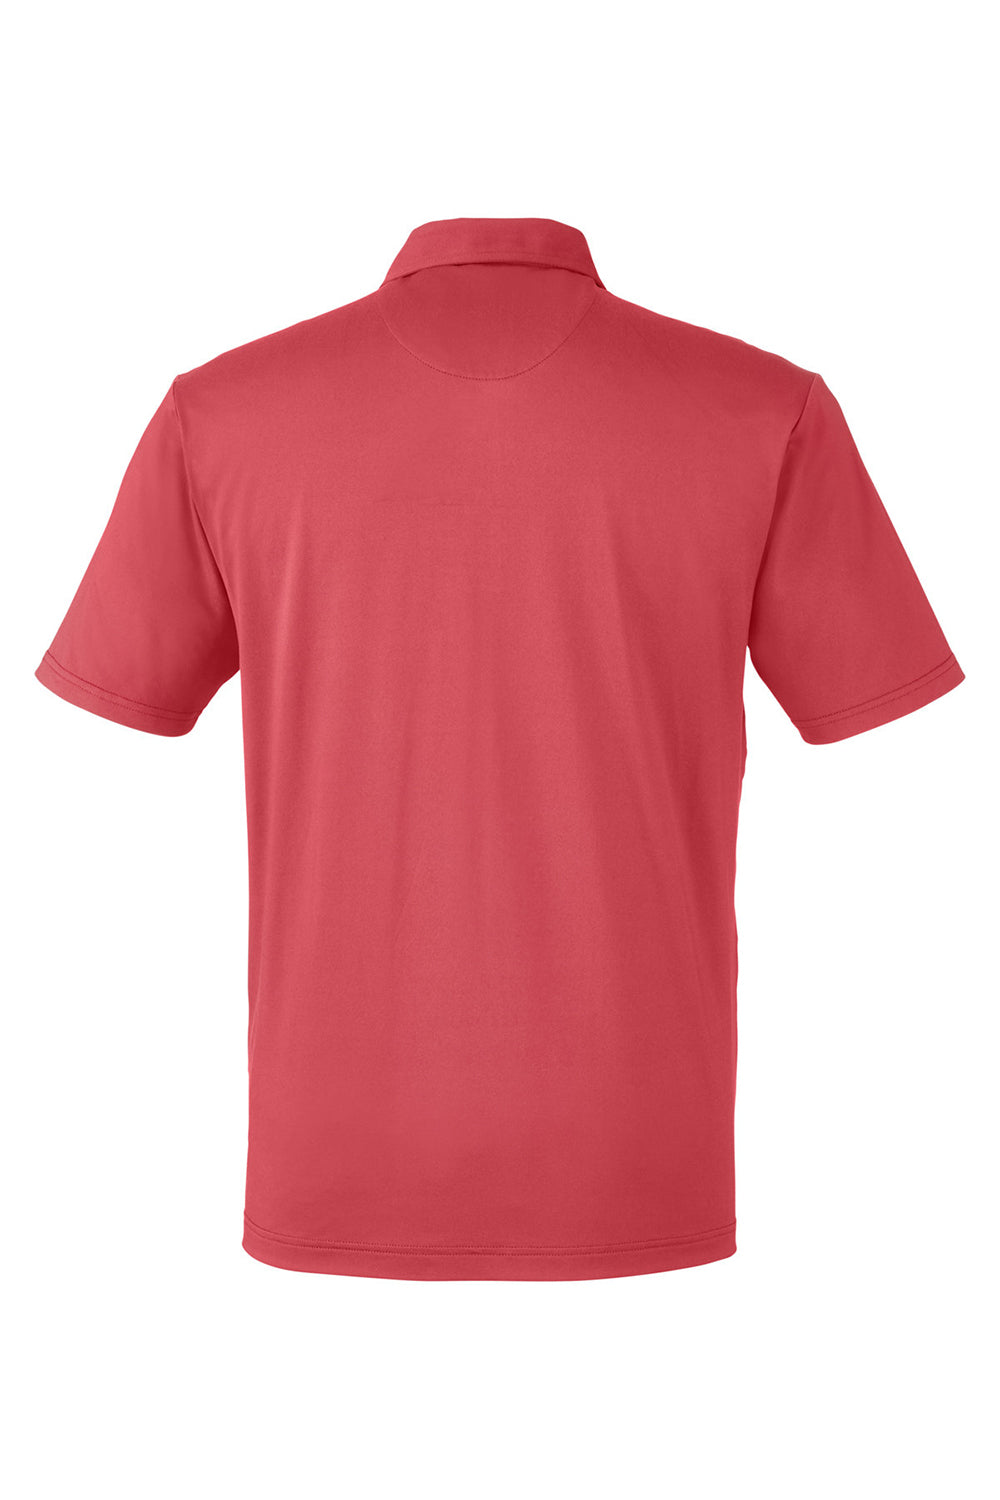 Swannies Golf SW2000 Mens James Short Sleeve Polo Shirt Heather Red Flat Back